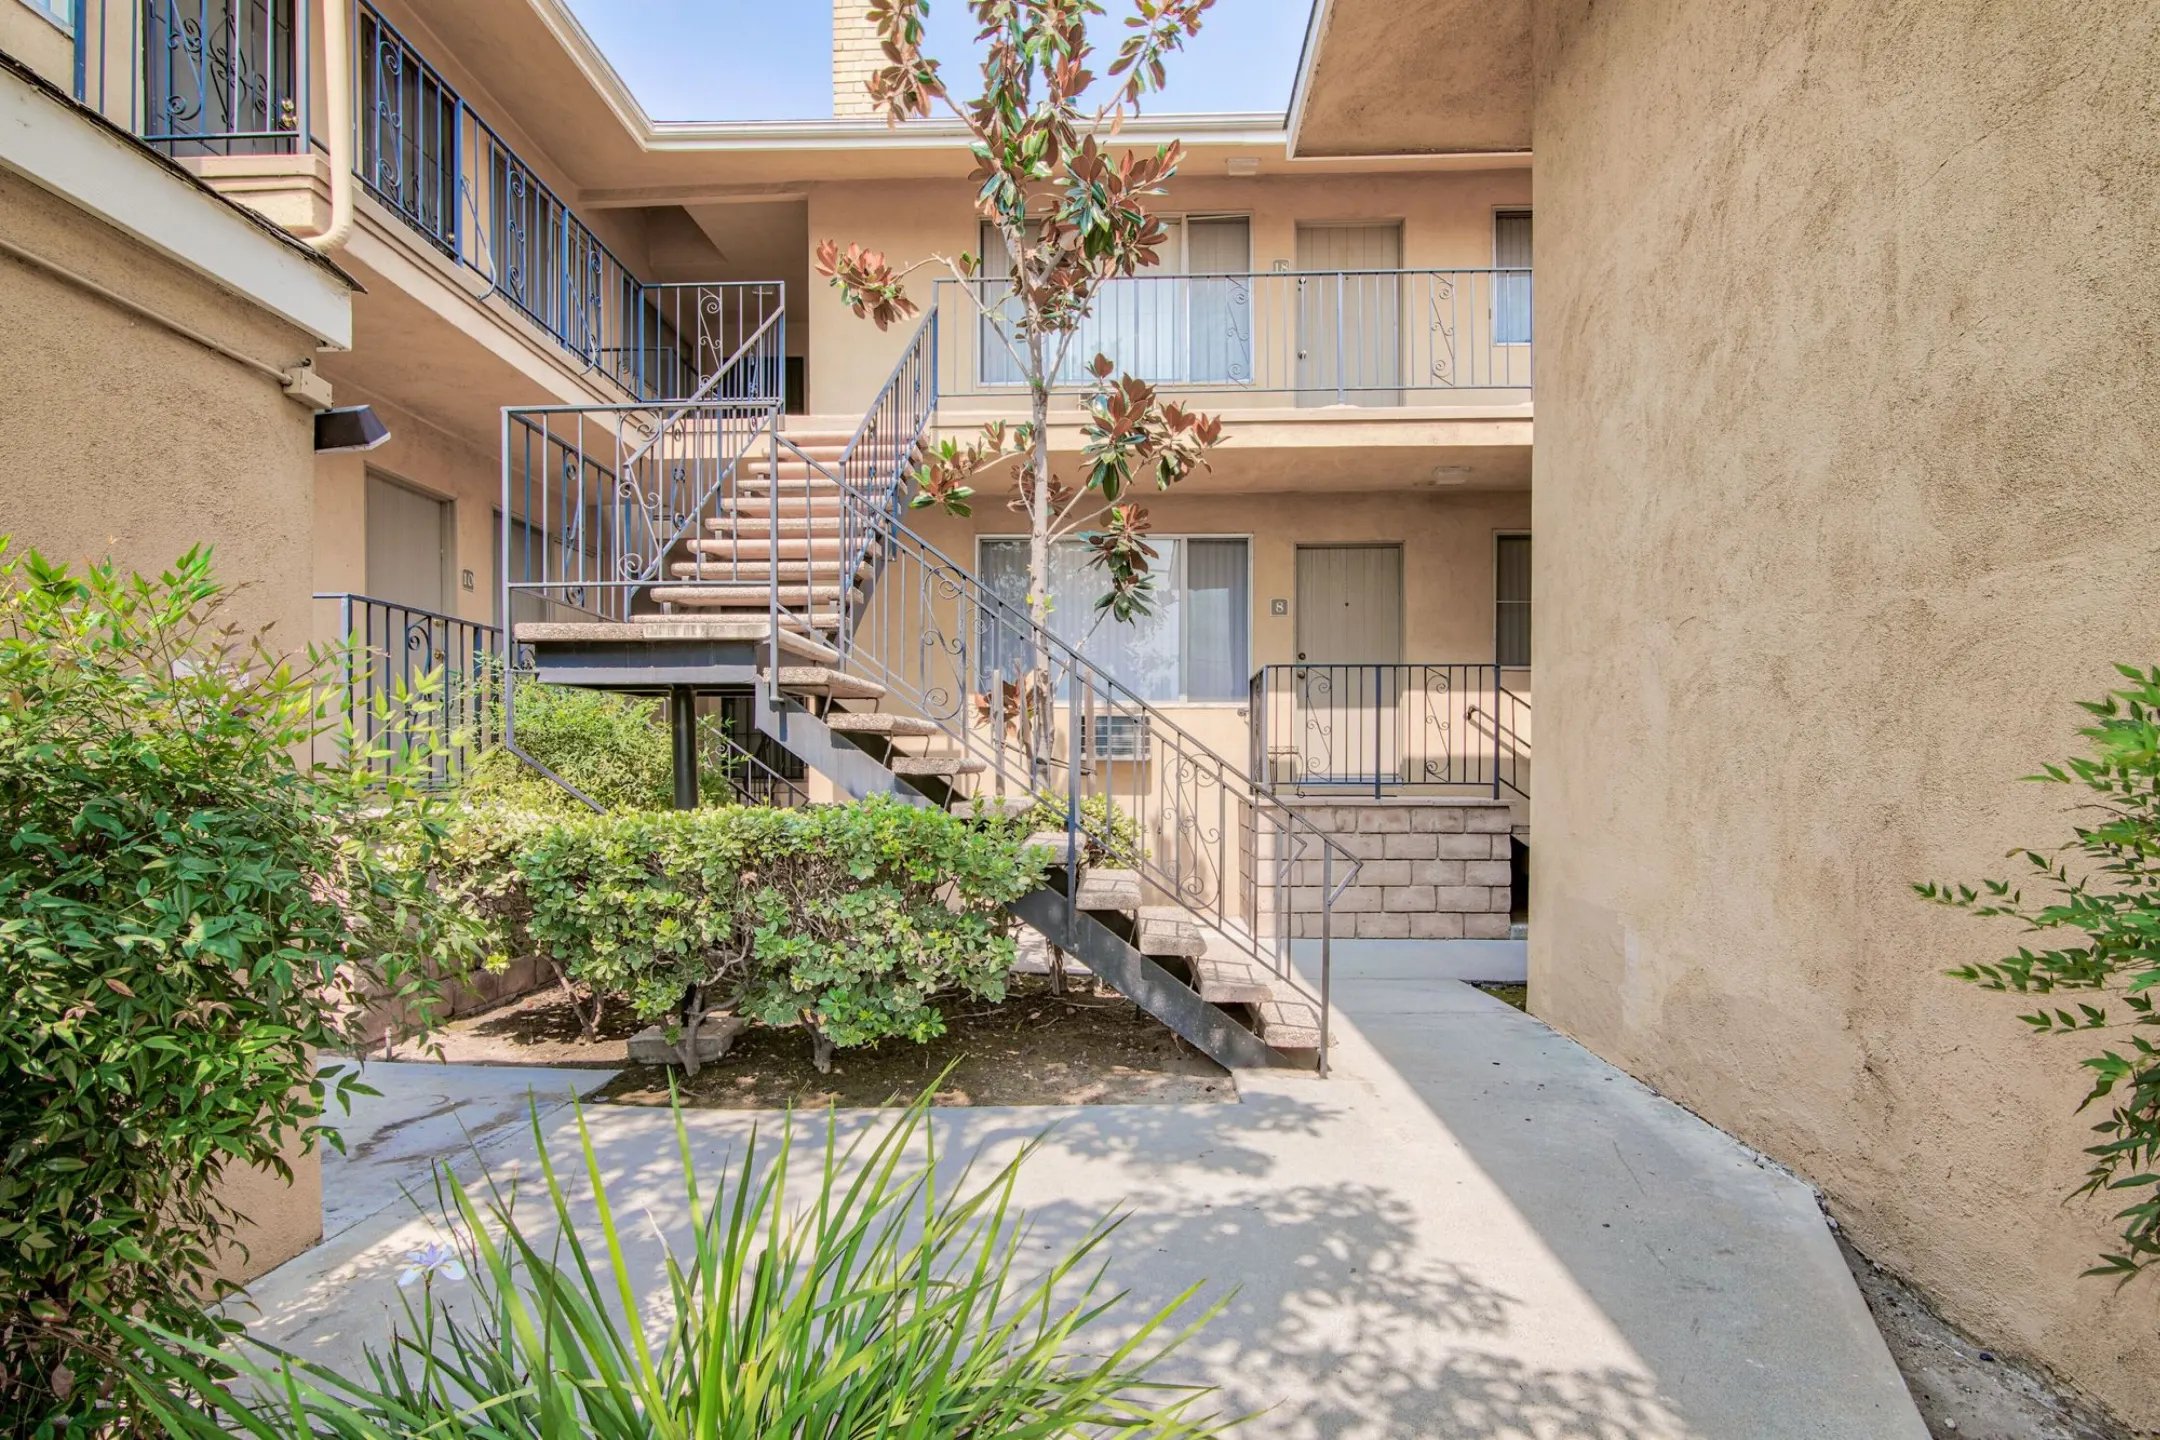 Building - Gardenview Apartments - Downey, CA